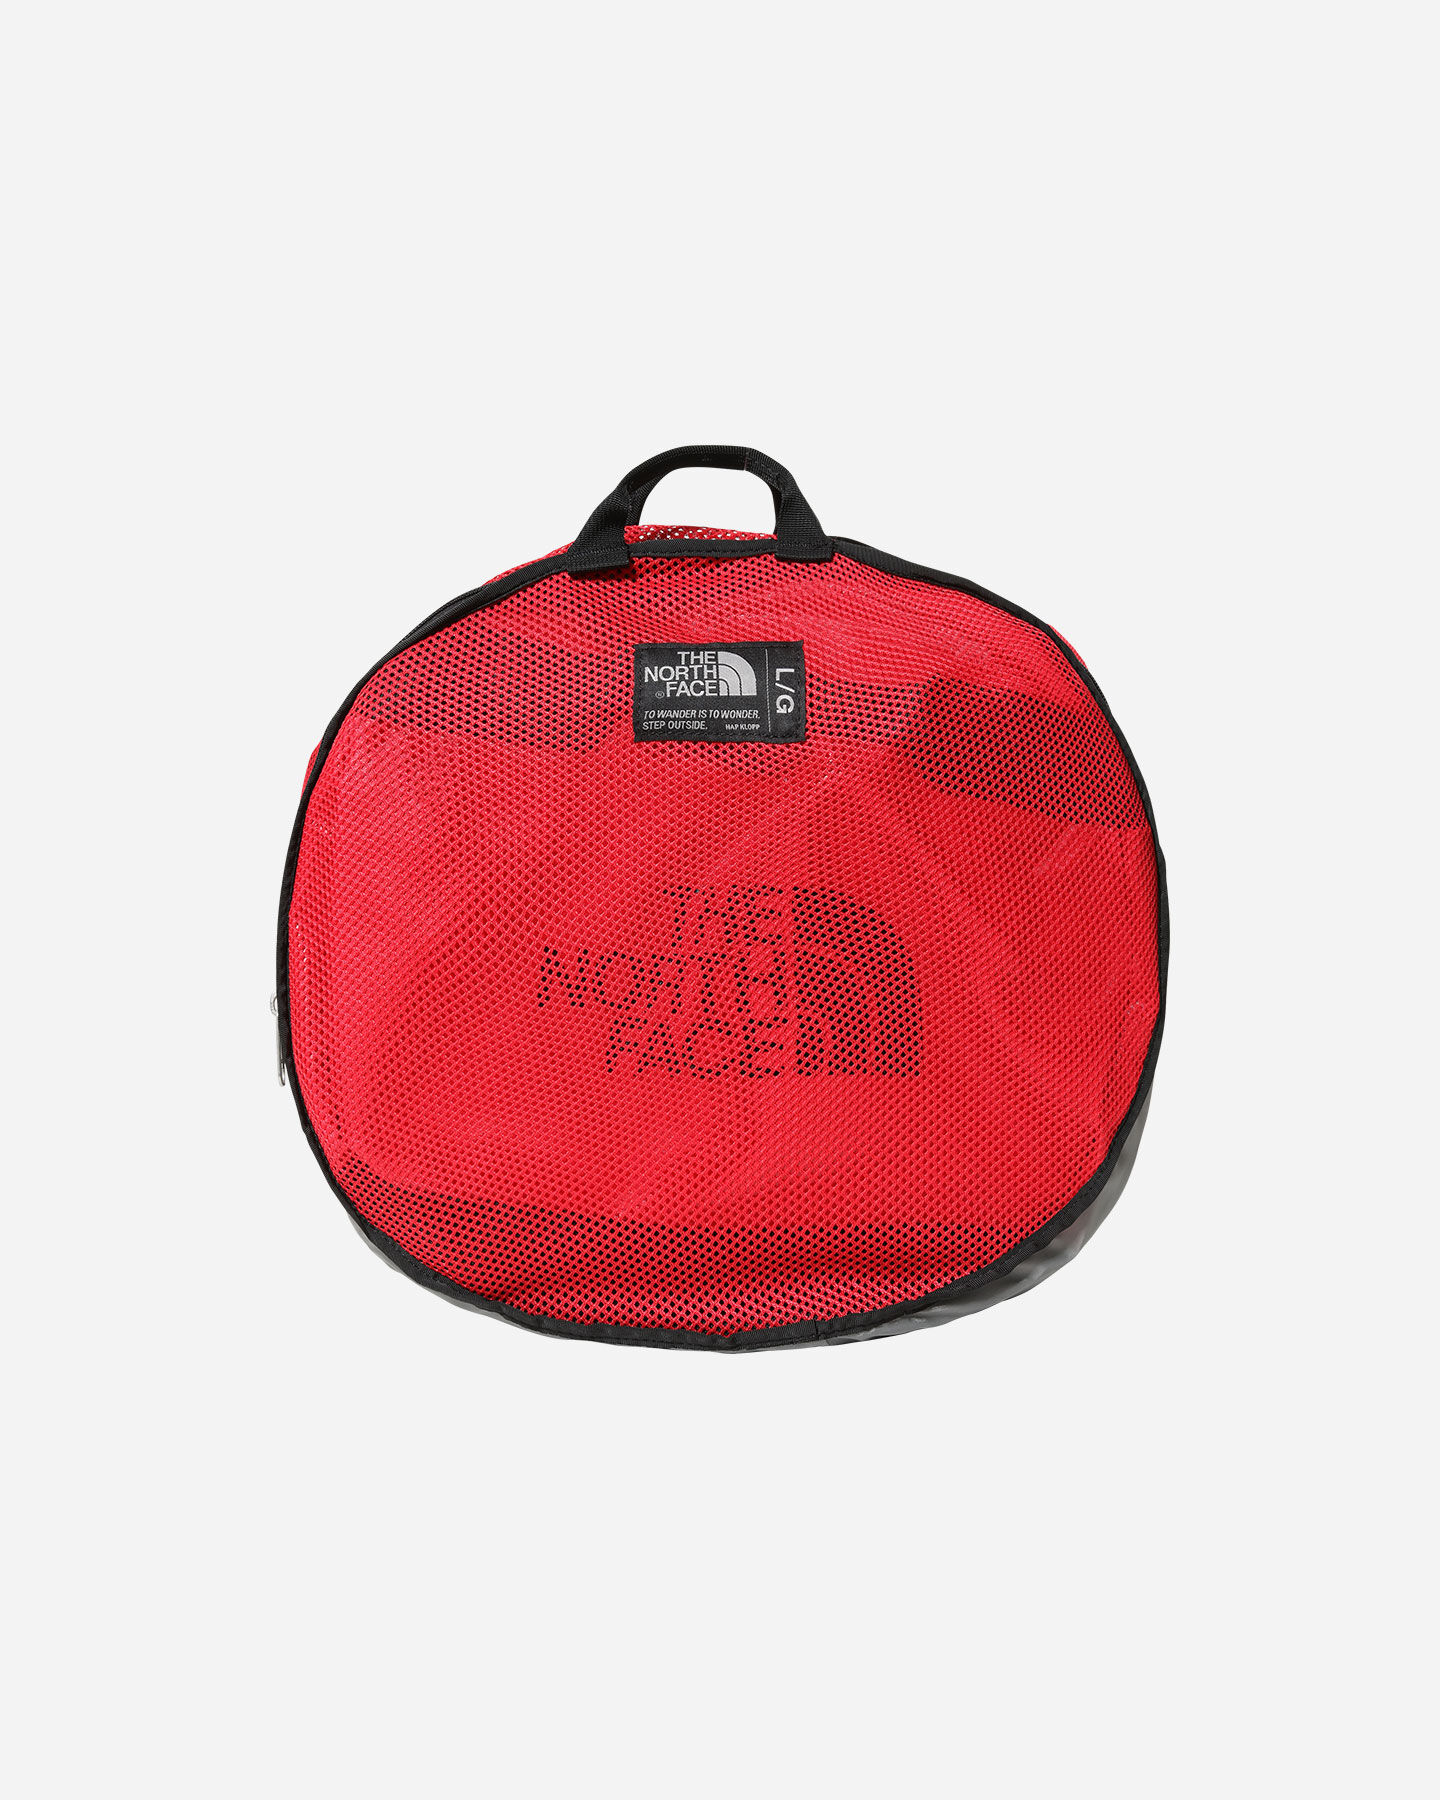  Borsa THE NORTH FACE BASE CAMP DUFFEL LARGE SUMMIT S5347749|KZ3|OS scatto 3